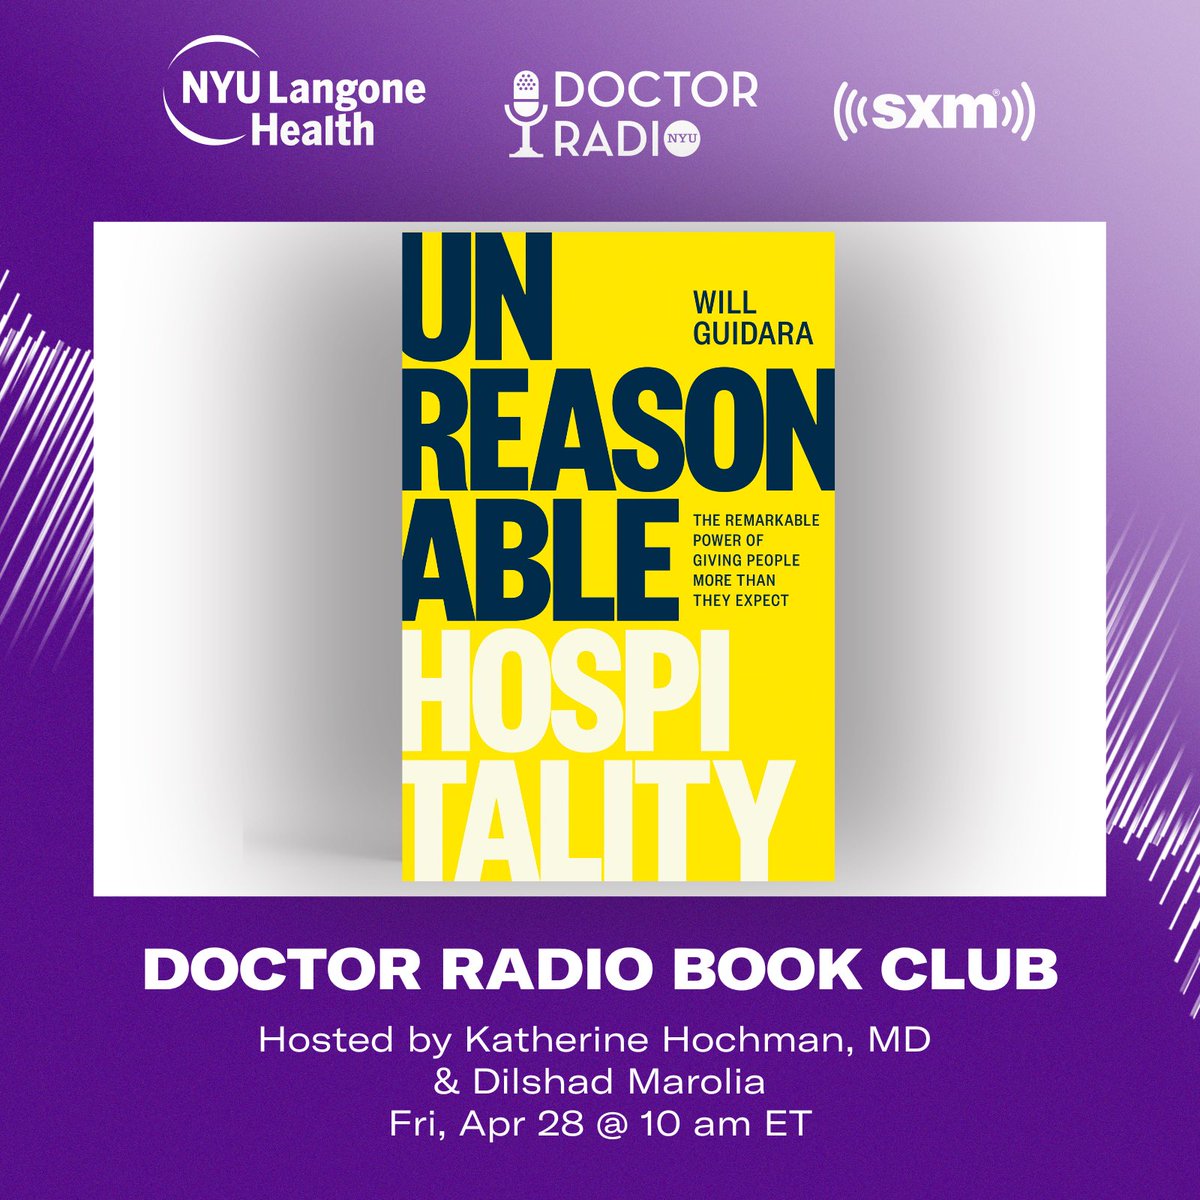 Very excited to be discussing this amazing book with @wguidara , my co-host @KHochmanMD and our leader, Dean Robert Grossman. #beunreasonable